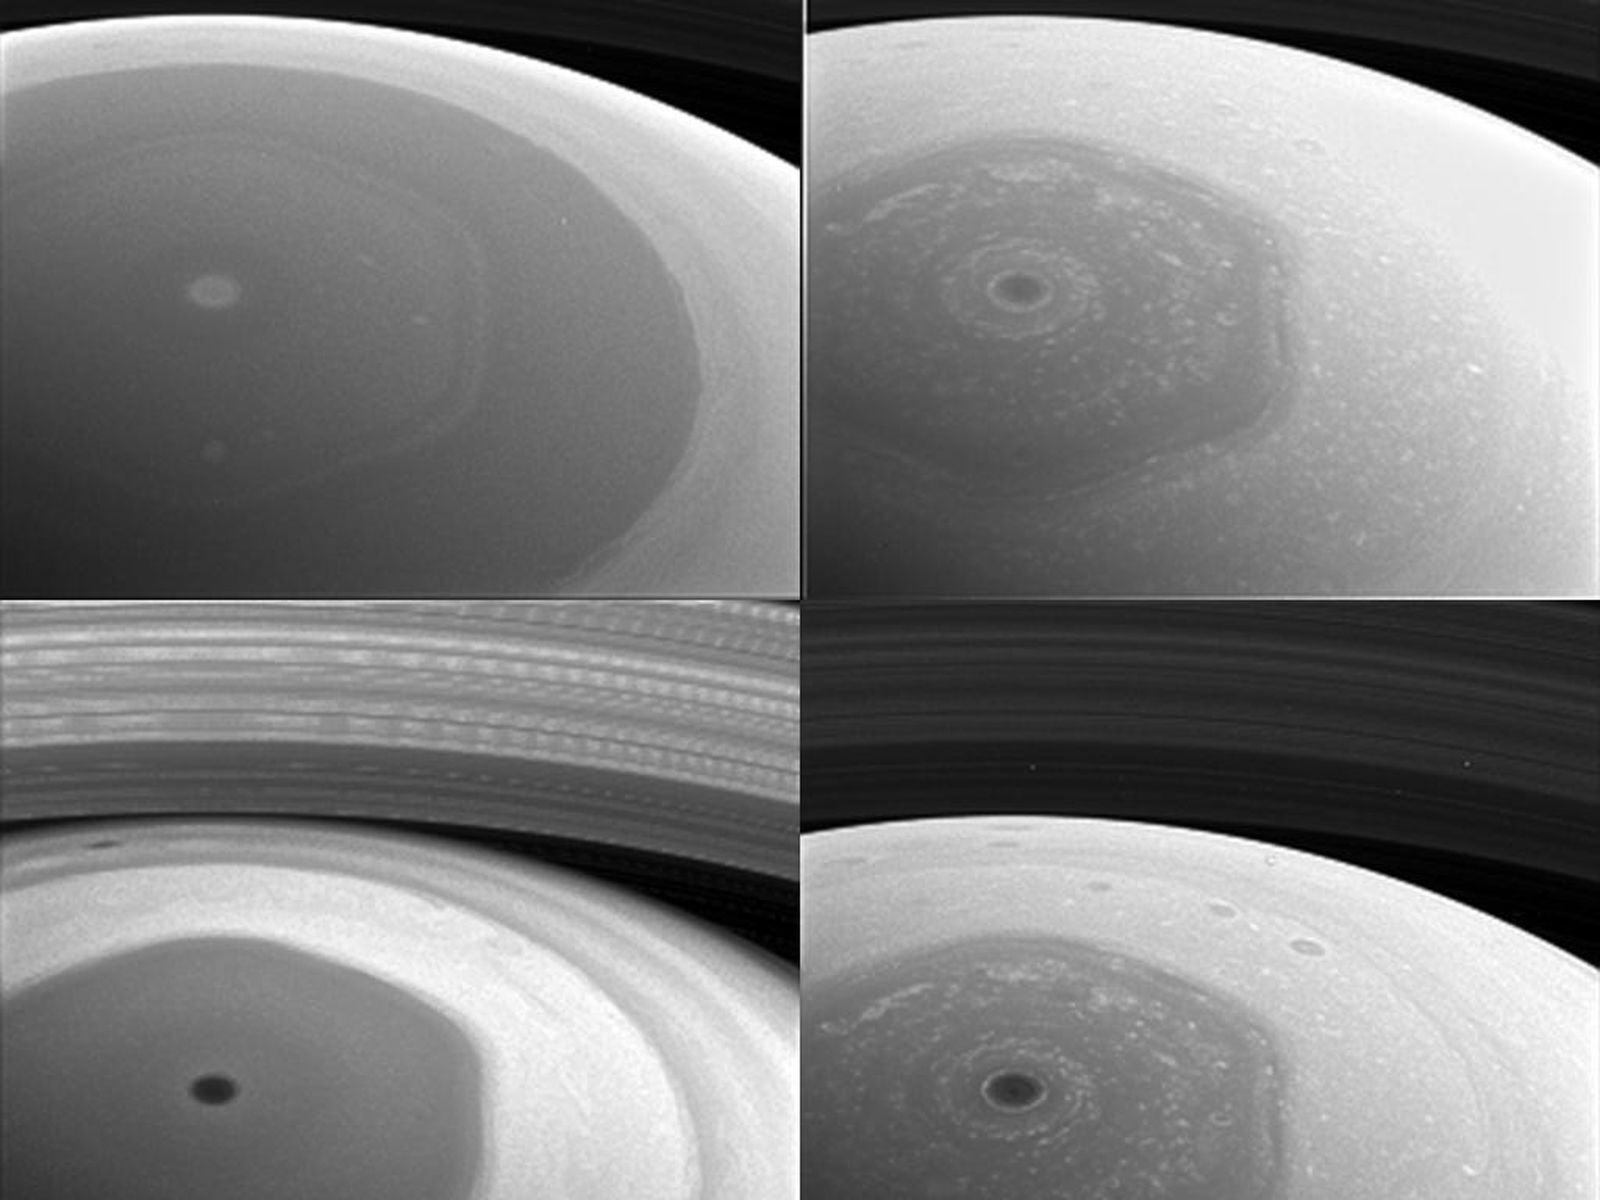 This collage of images from NASA's Cassini spacecraft shows Saturn's northern hemisphere and rings as viewed with four different spectral filters. (NASA/JPL-Caltech/Space Science Institute)